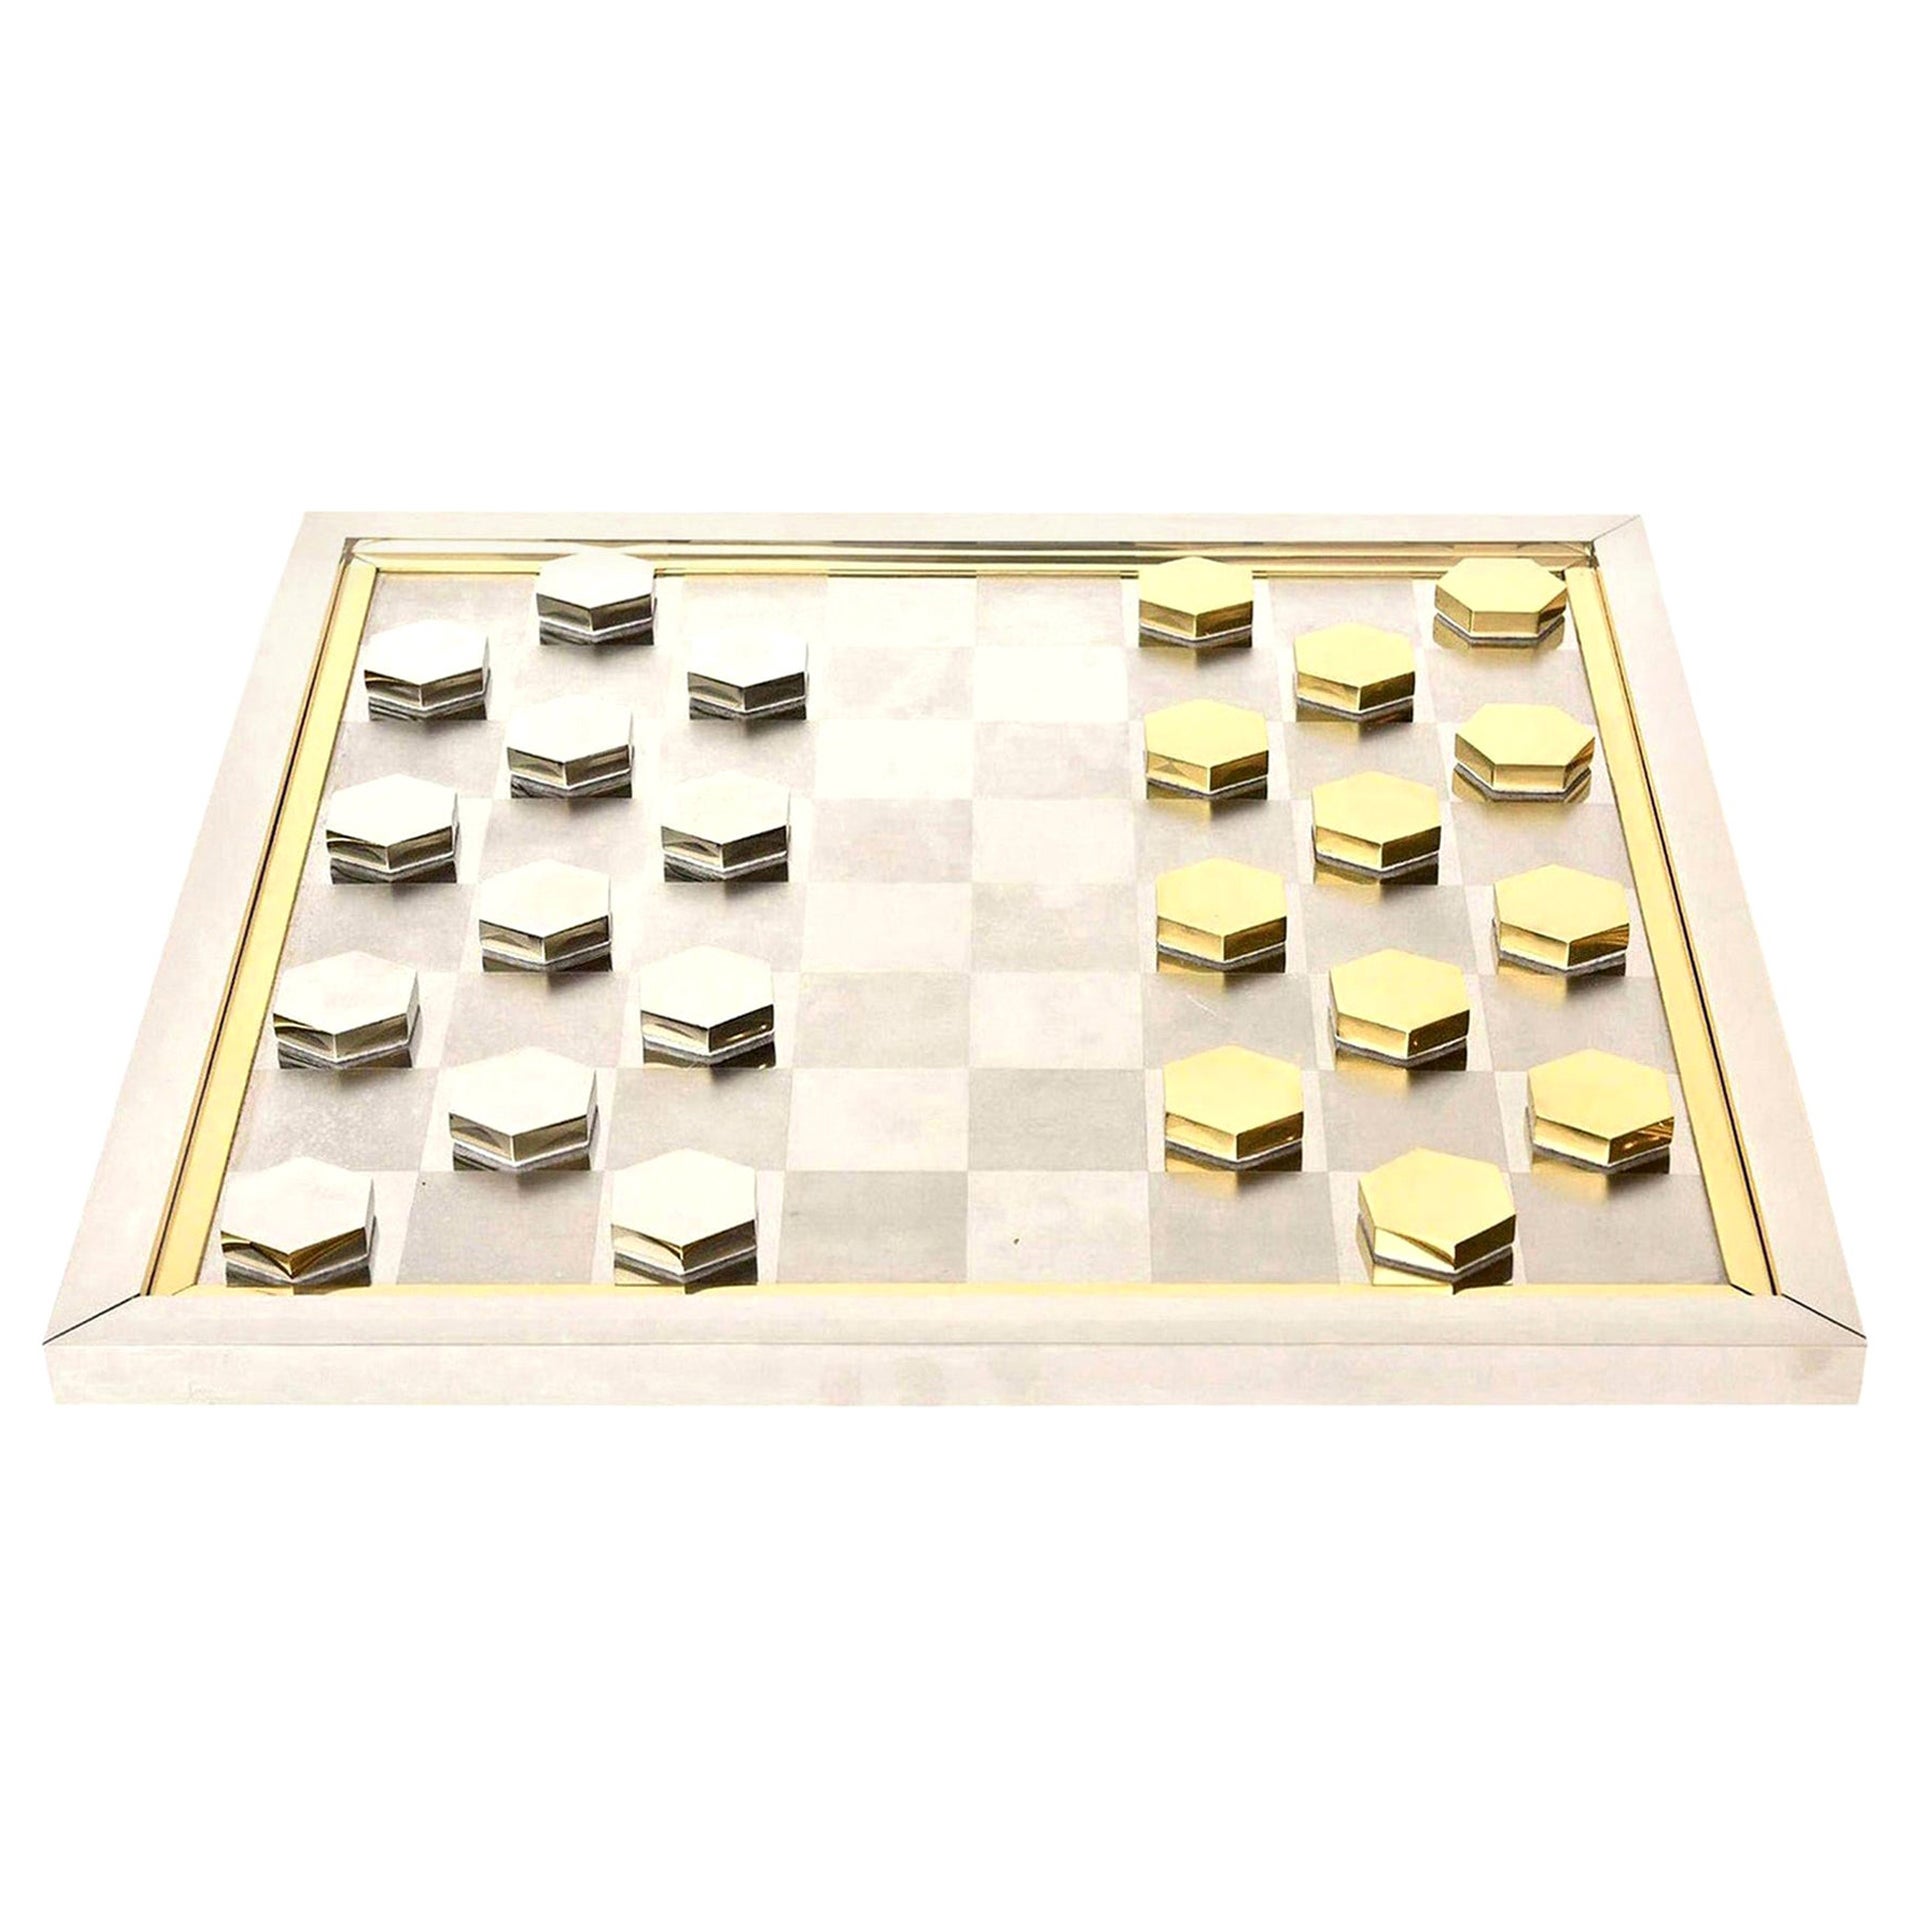 Romeo Rega Signed Brass and Chrome-Plated Checkers Game, Italian Vintage For Sale